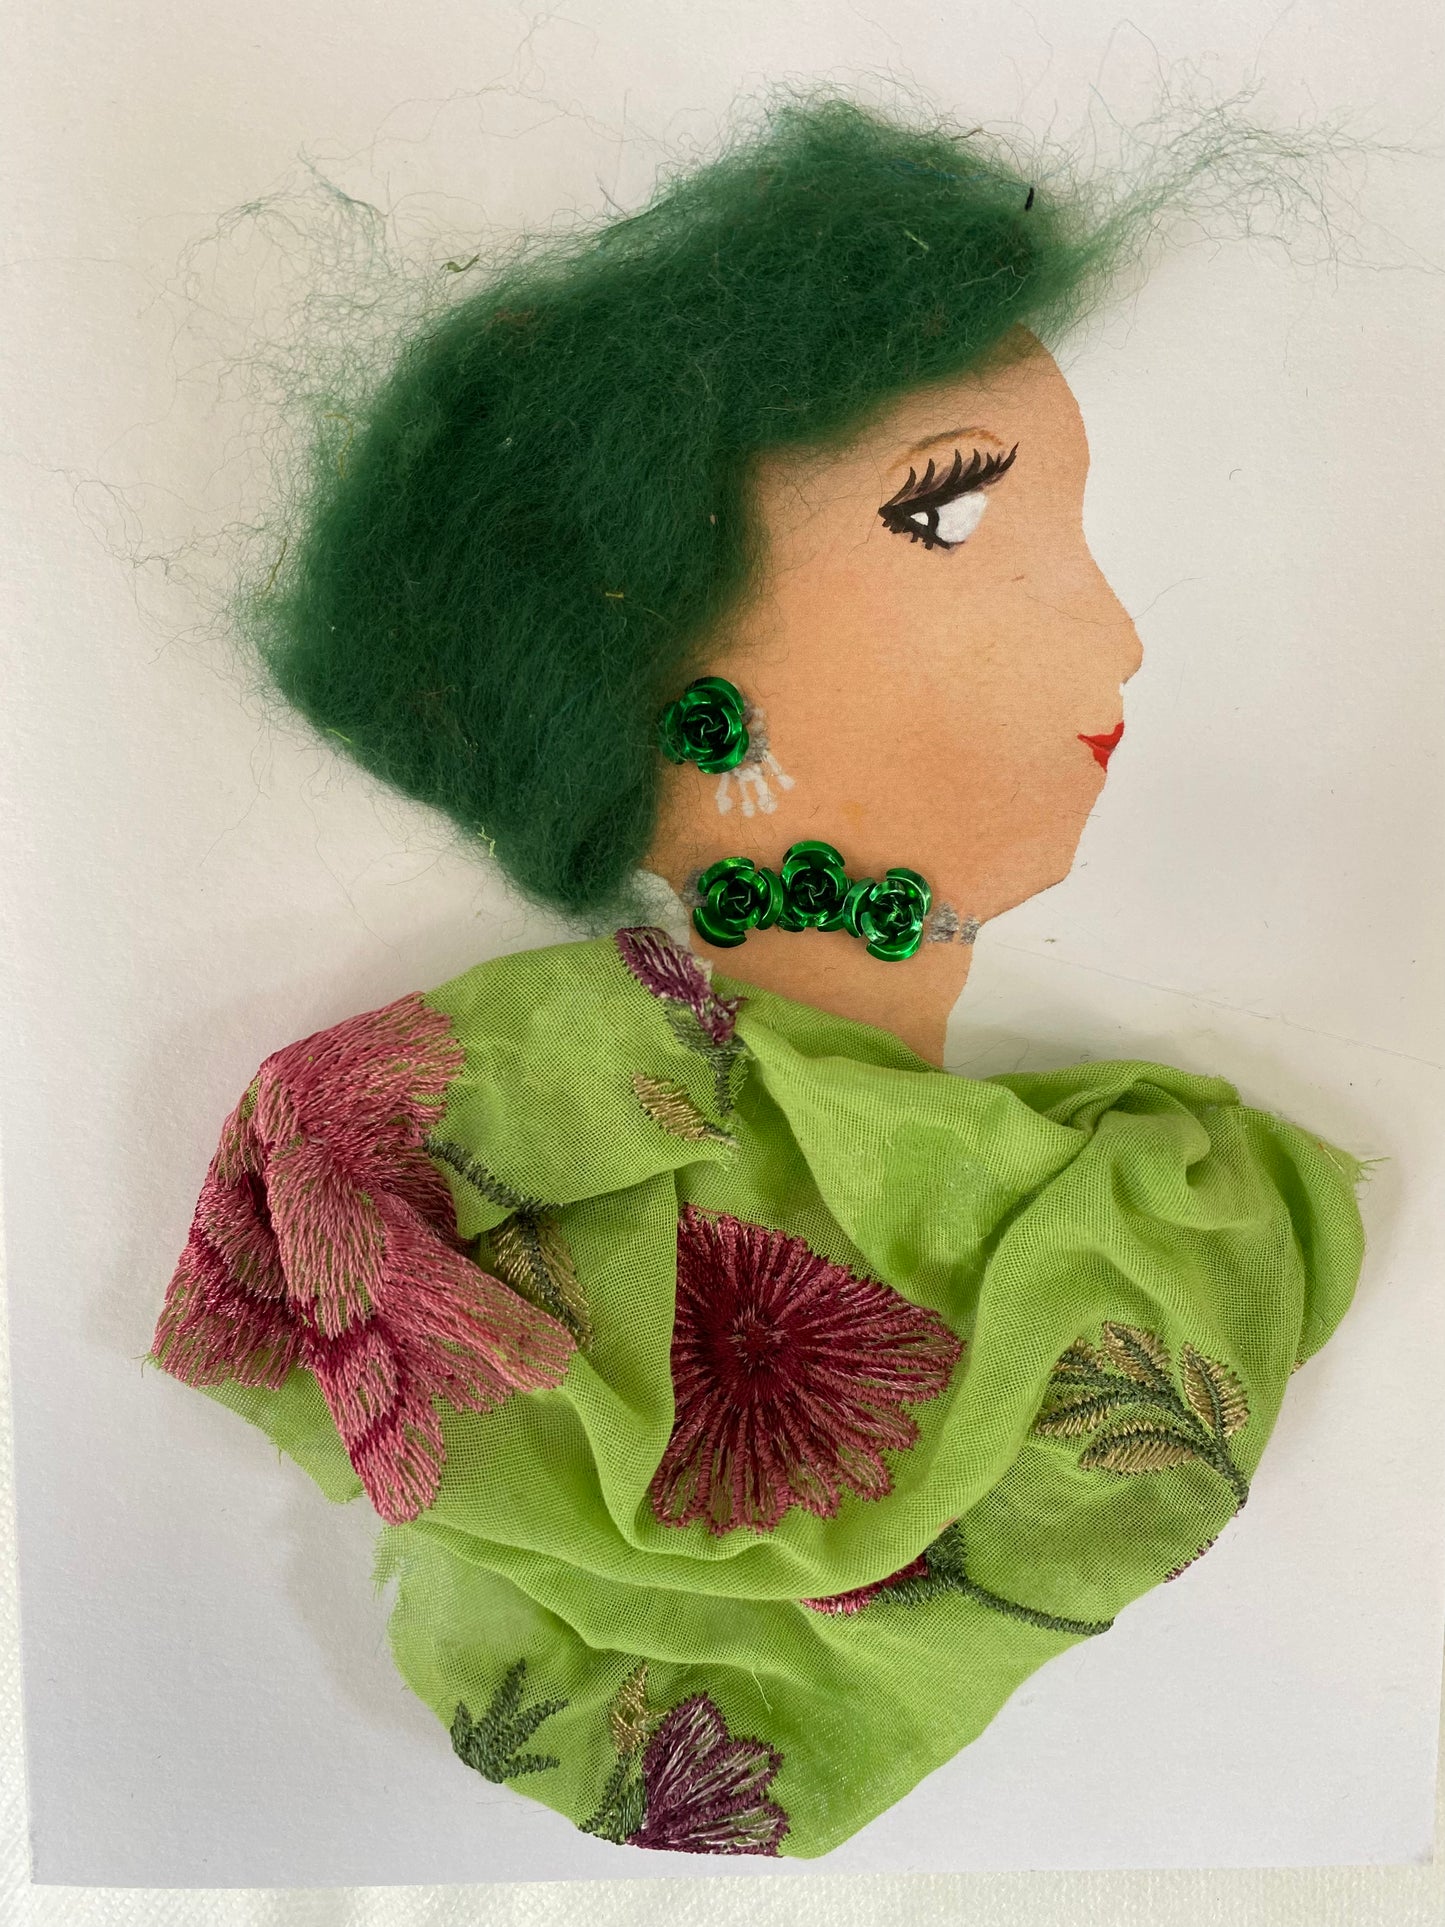 I designed this card of a woman named Genevieve Generous. She has a white skin tone and is wearing a green blouse with maroon flowers. She wears a necklace that has green roses on it. She wears matching green rose earrings.